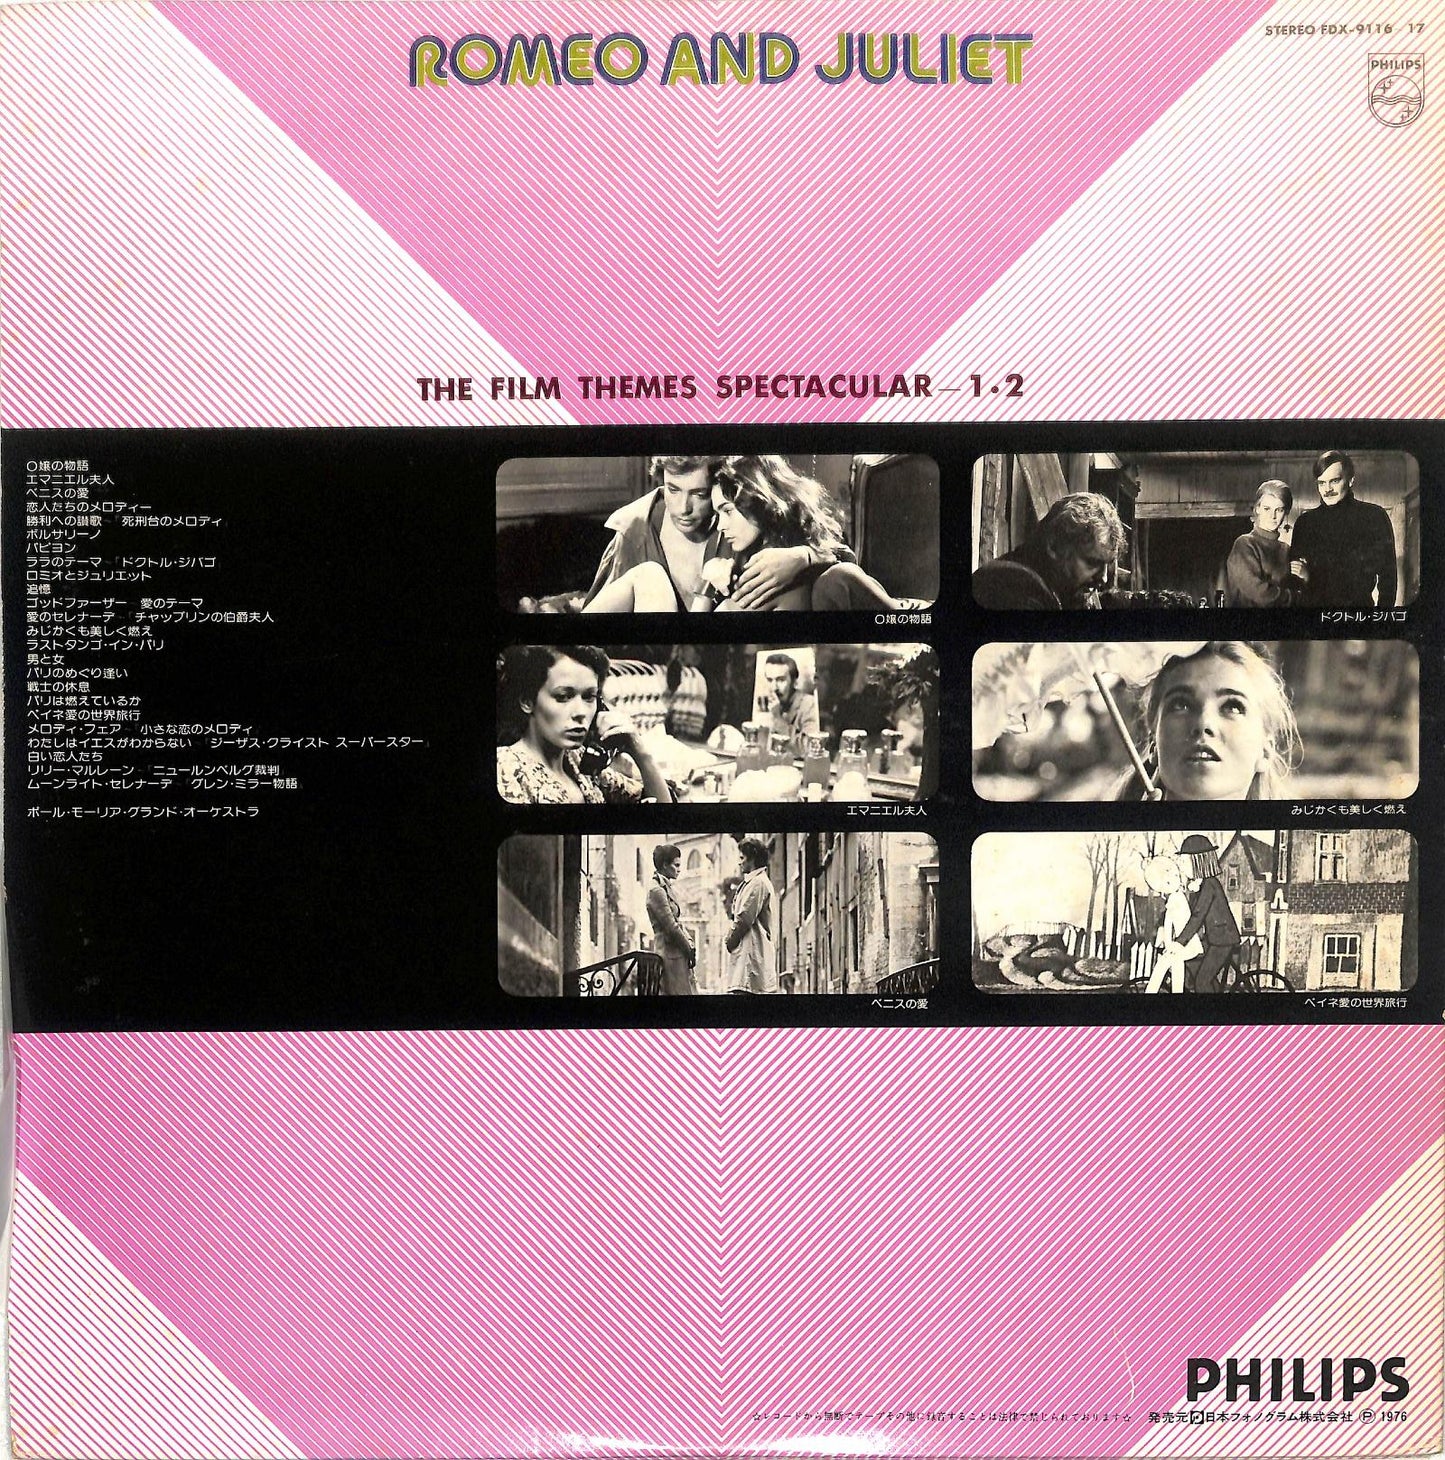 PAUL MAURIAT - Romeo And Juliet / The Film Themes Spectacular